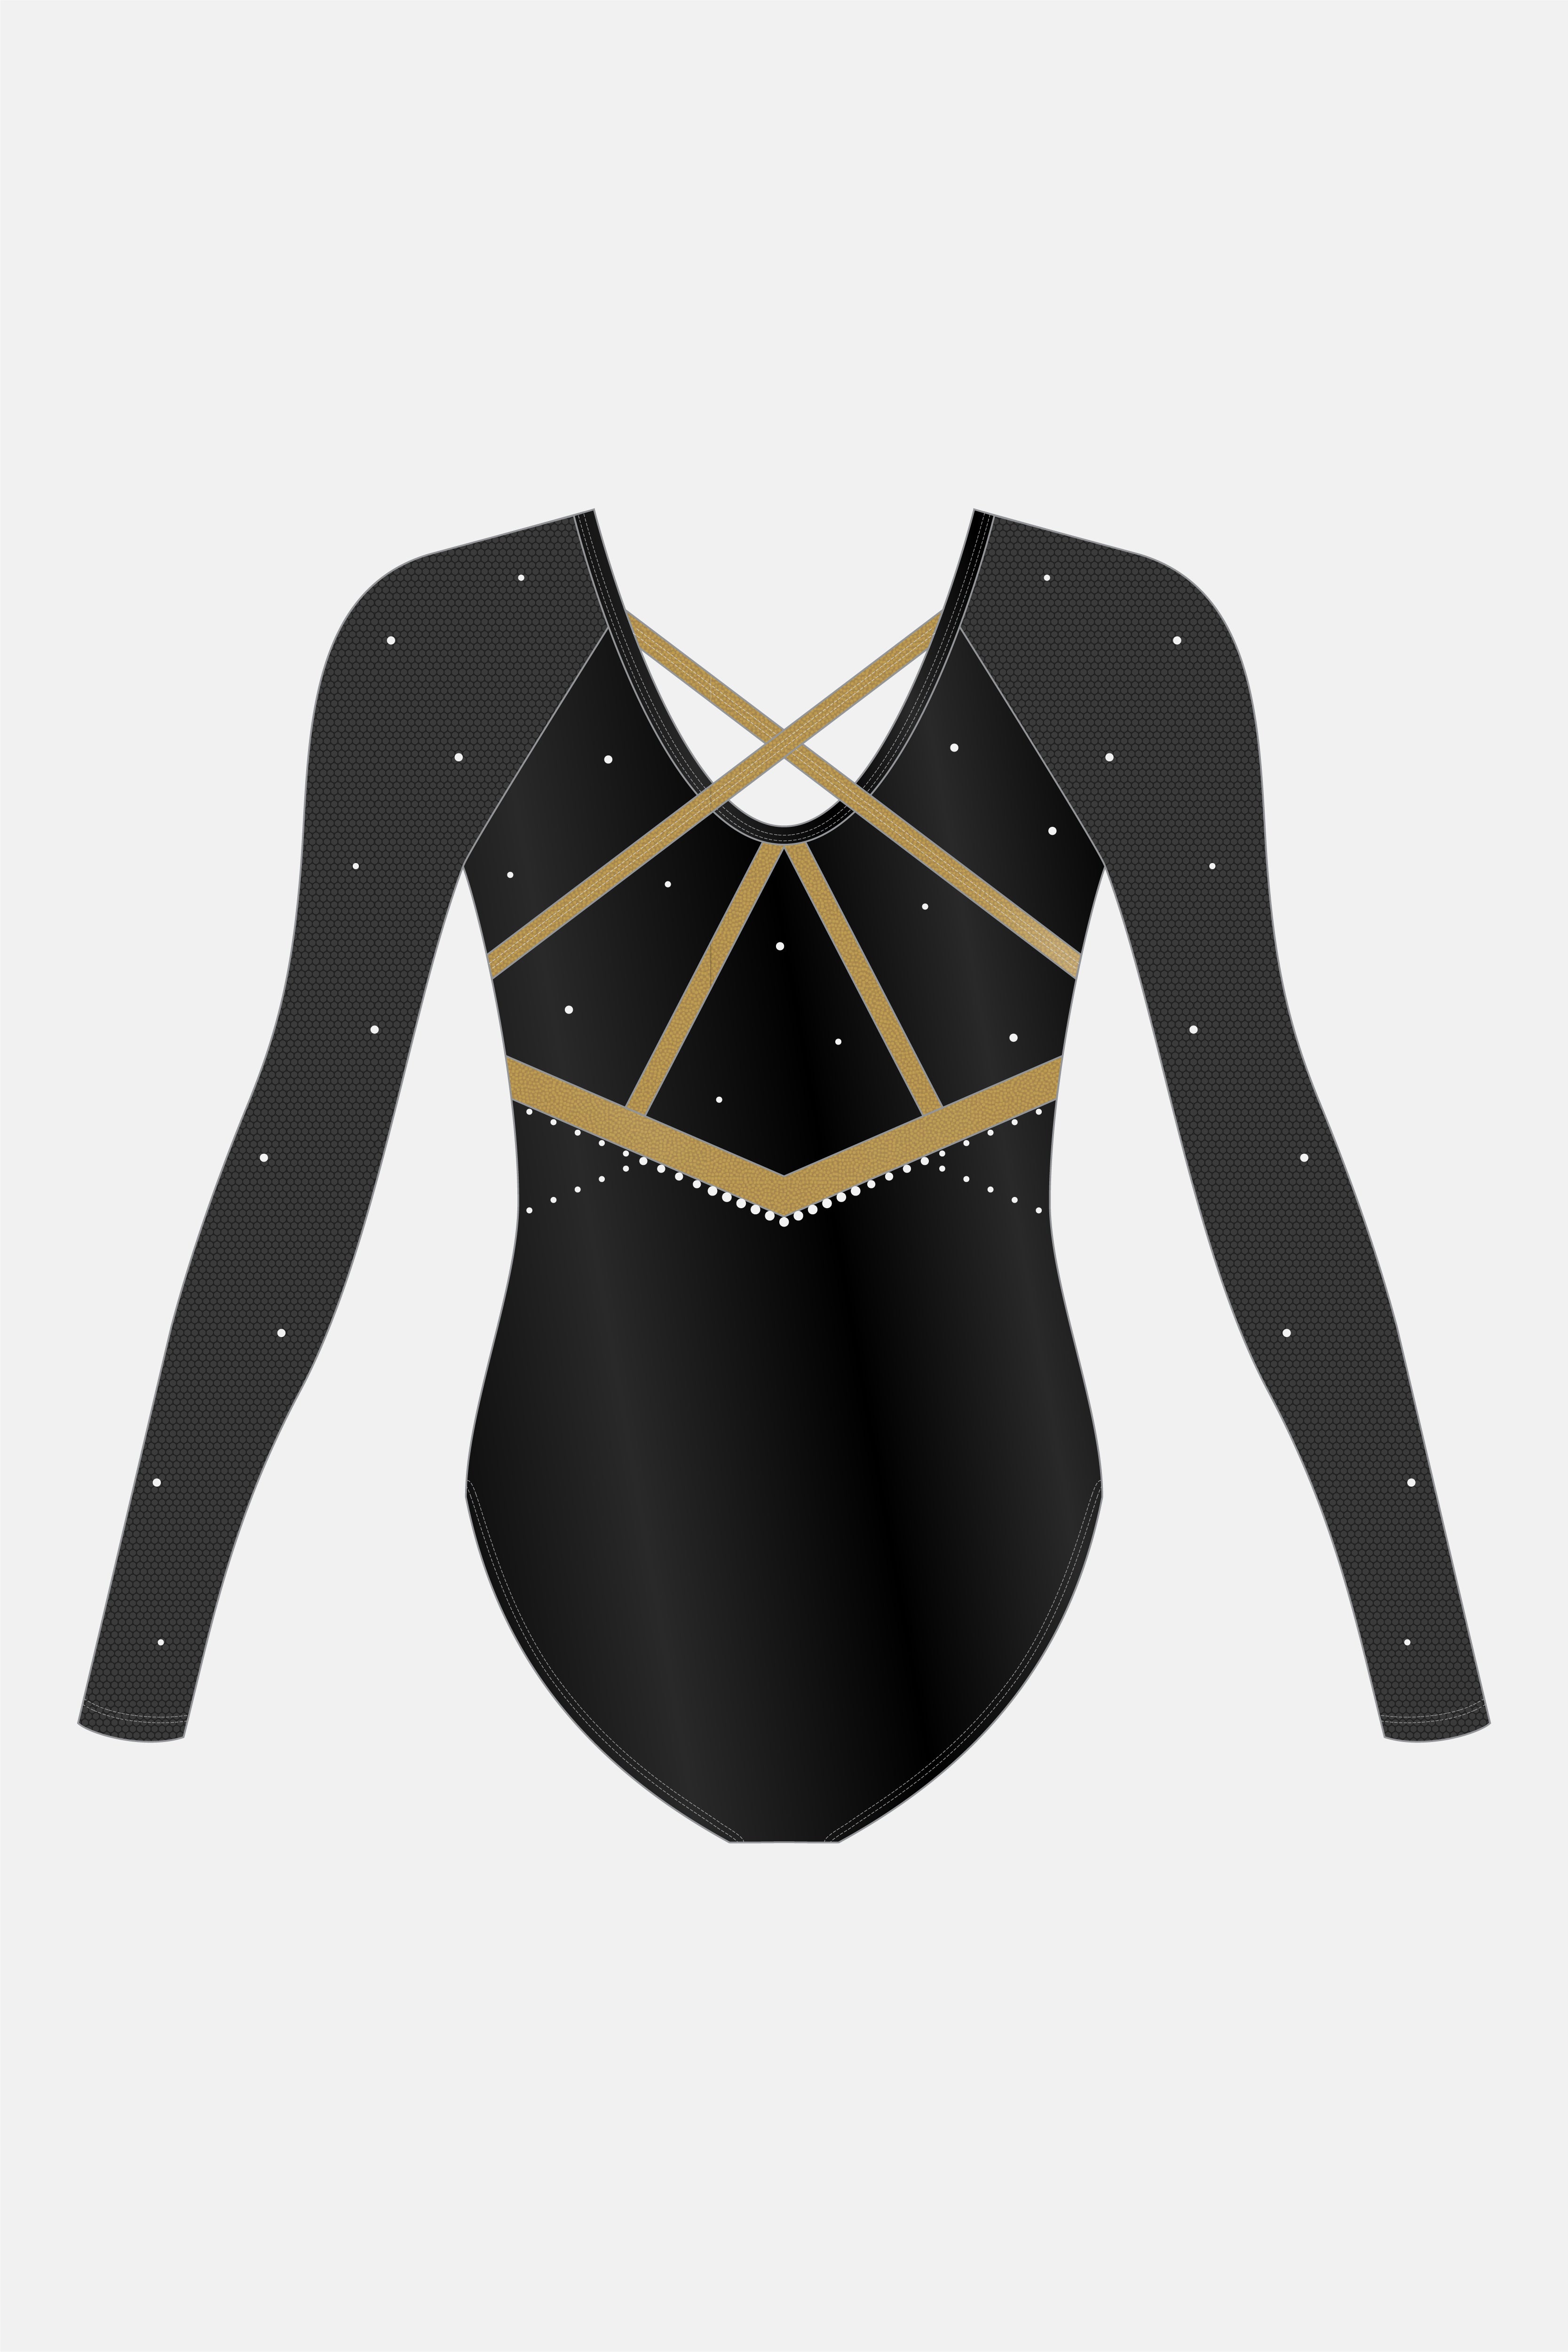 Womens Competition Leotard